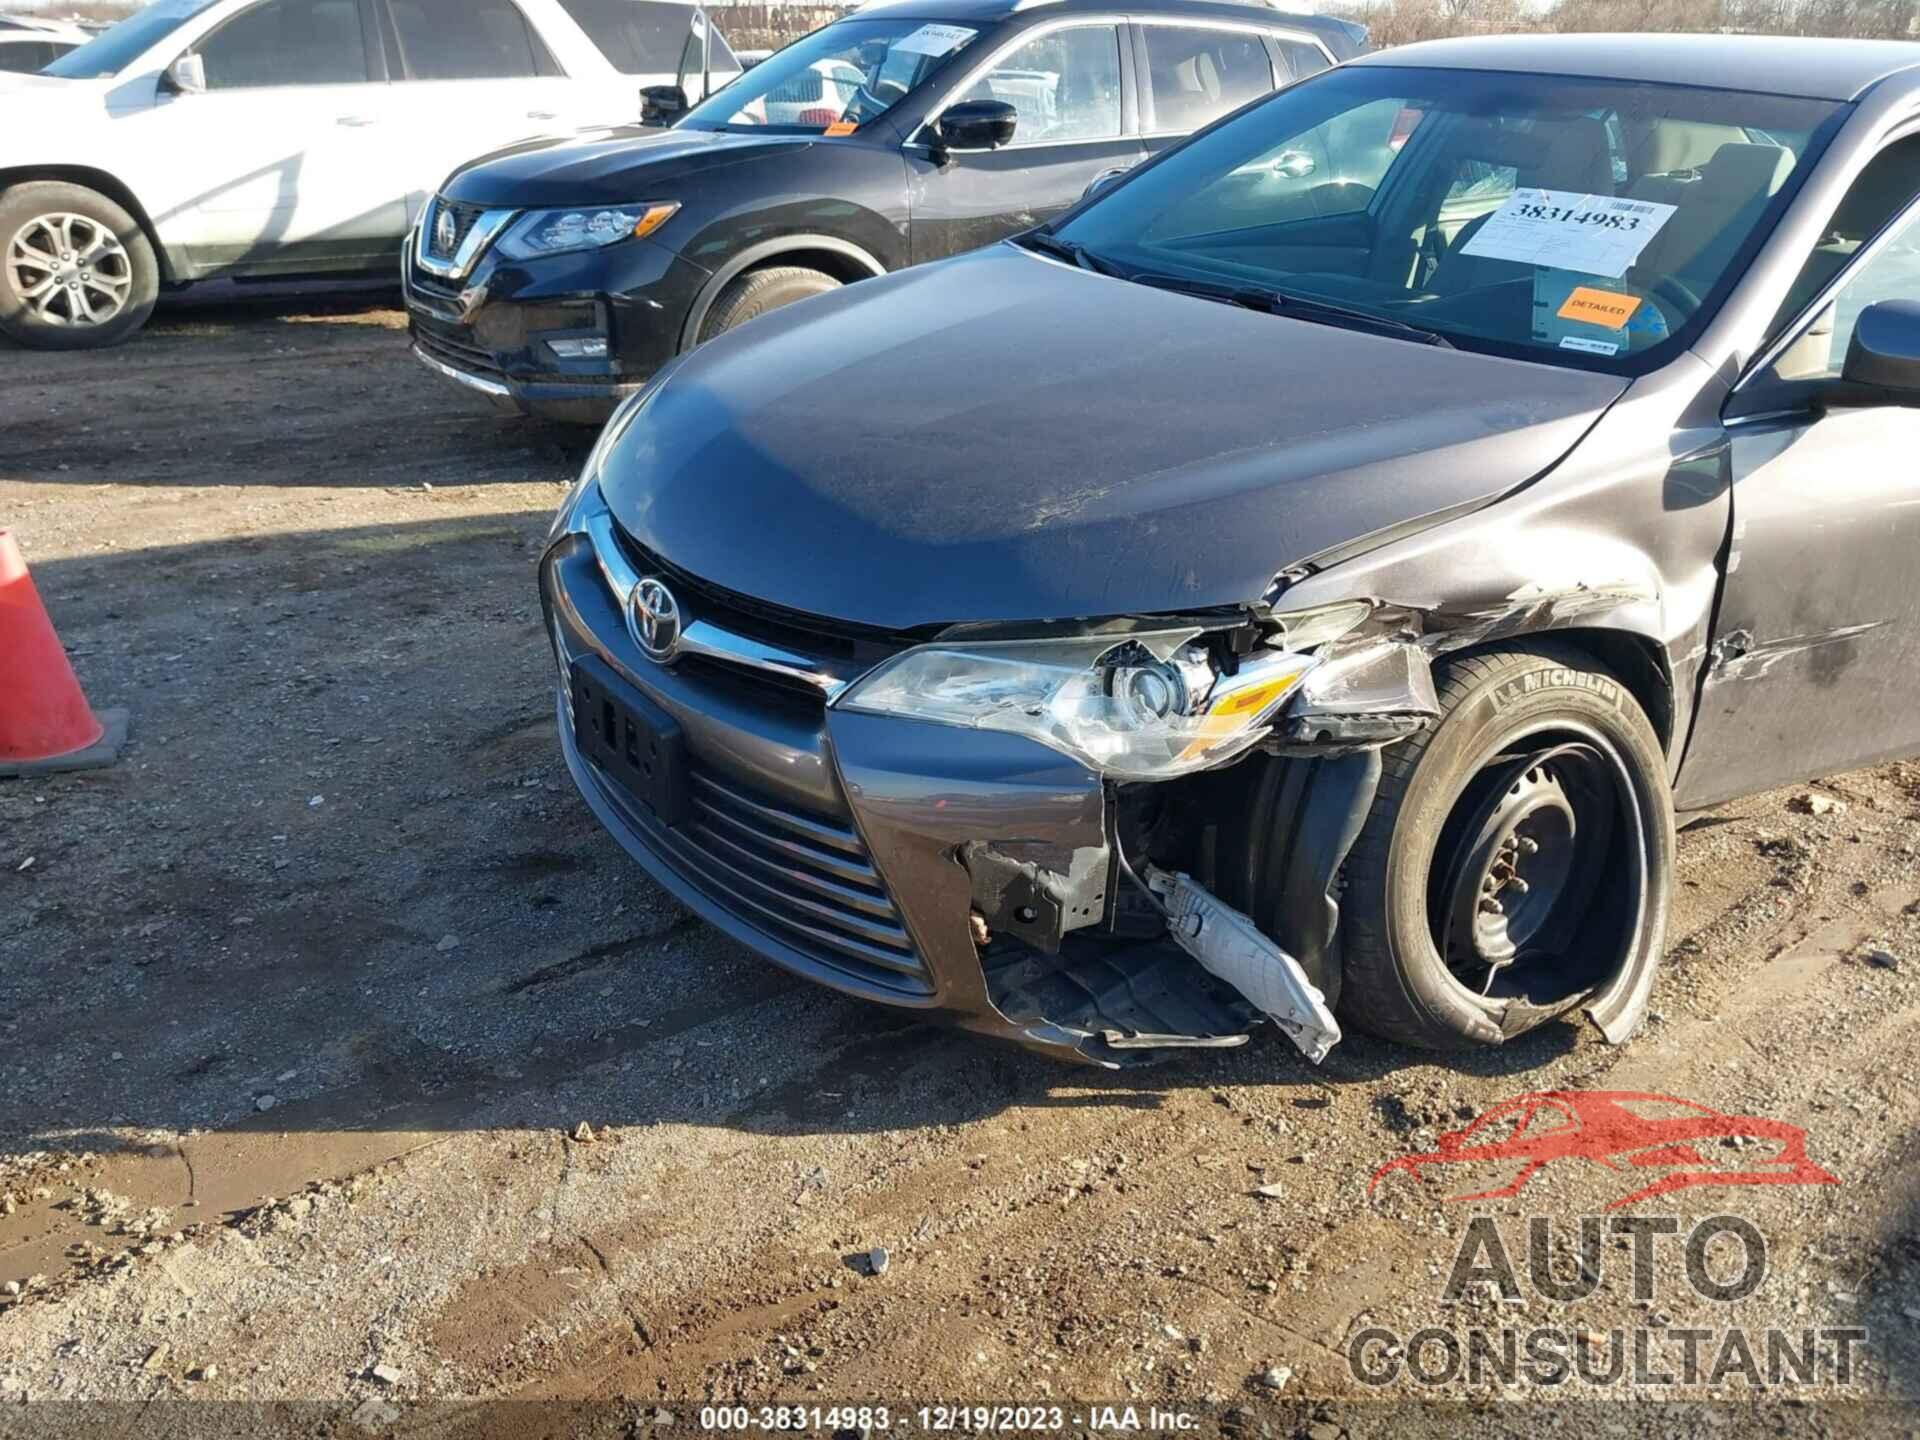 TOYOTA CAMRY 2016 - 4T4BF1FK6GR550779